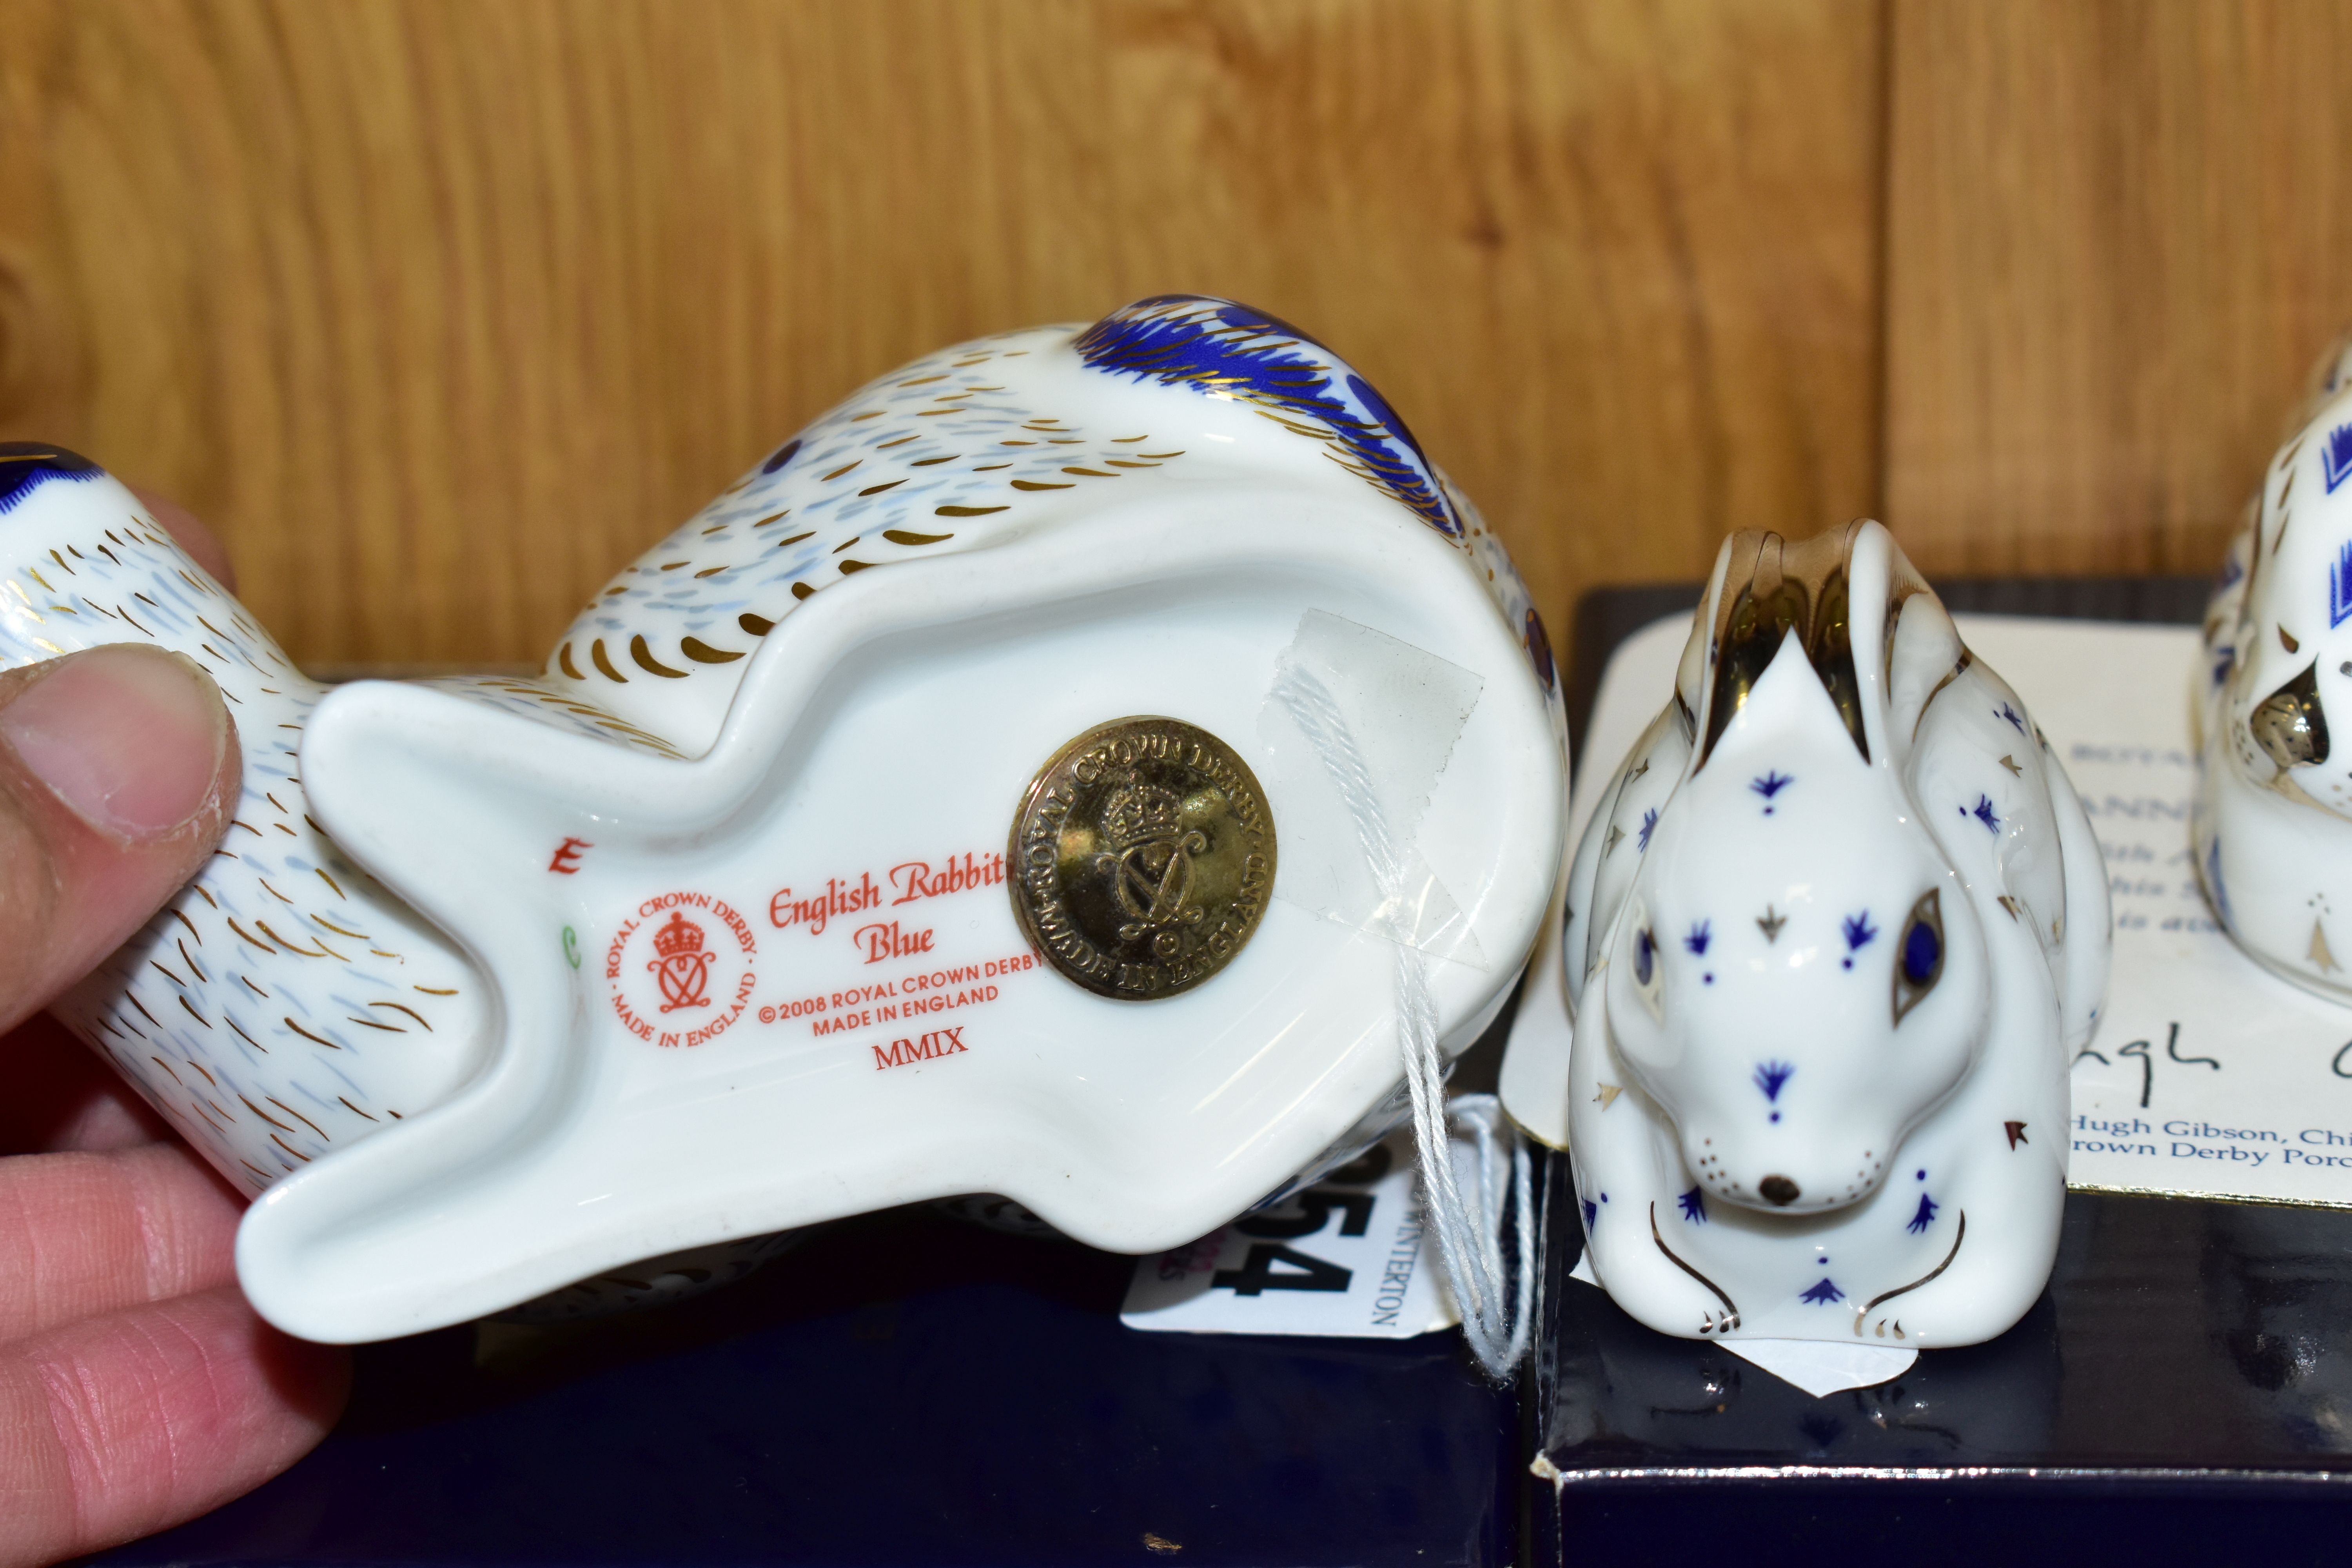 THREE BOXED ROYAL CROWN DERBY PAPERWEIGHTS, comprising English Rabbit, Blue, and 25th Anniversary - Image 4 of 4